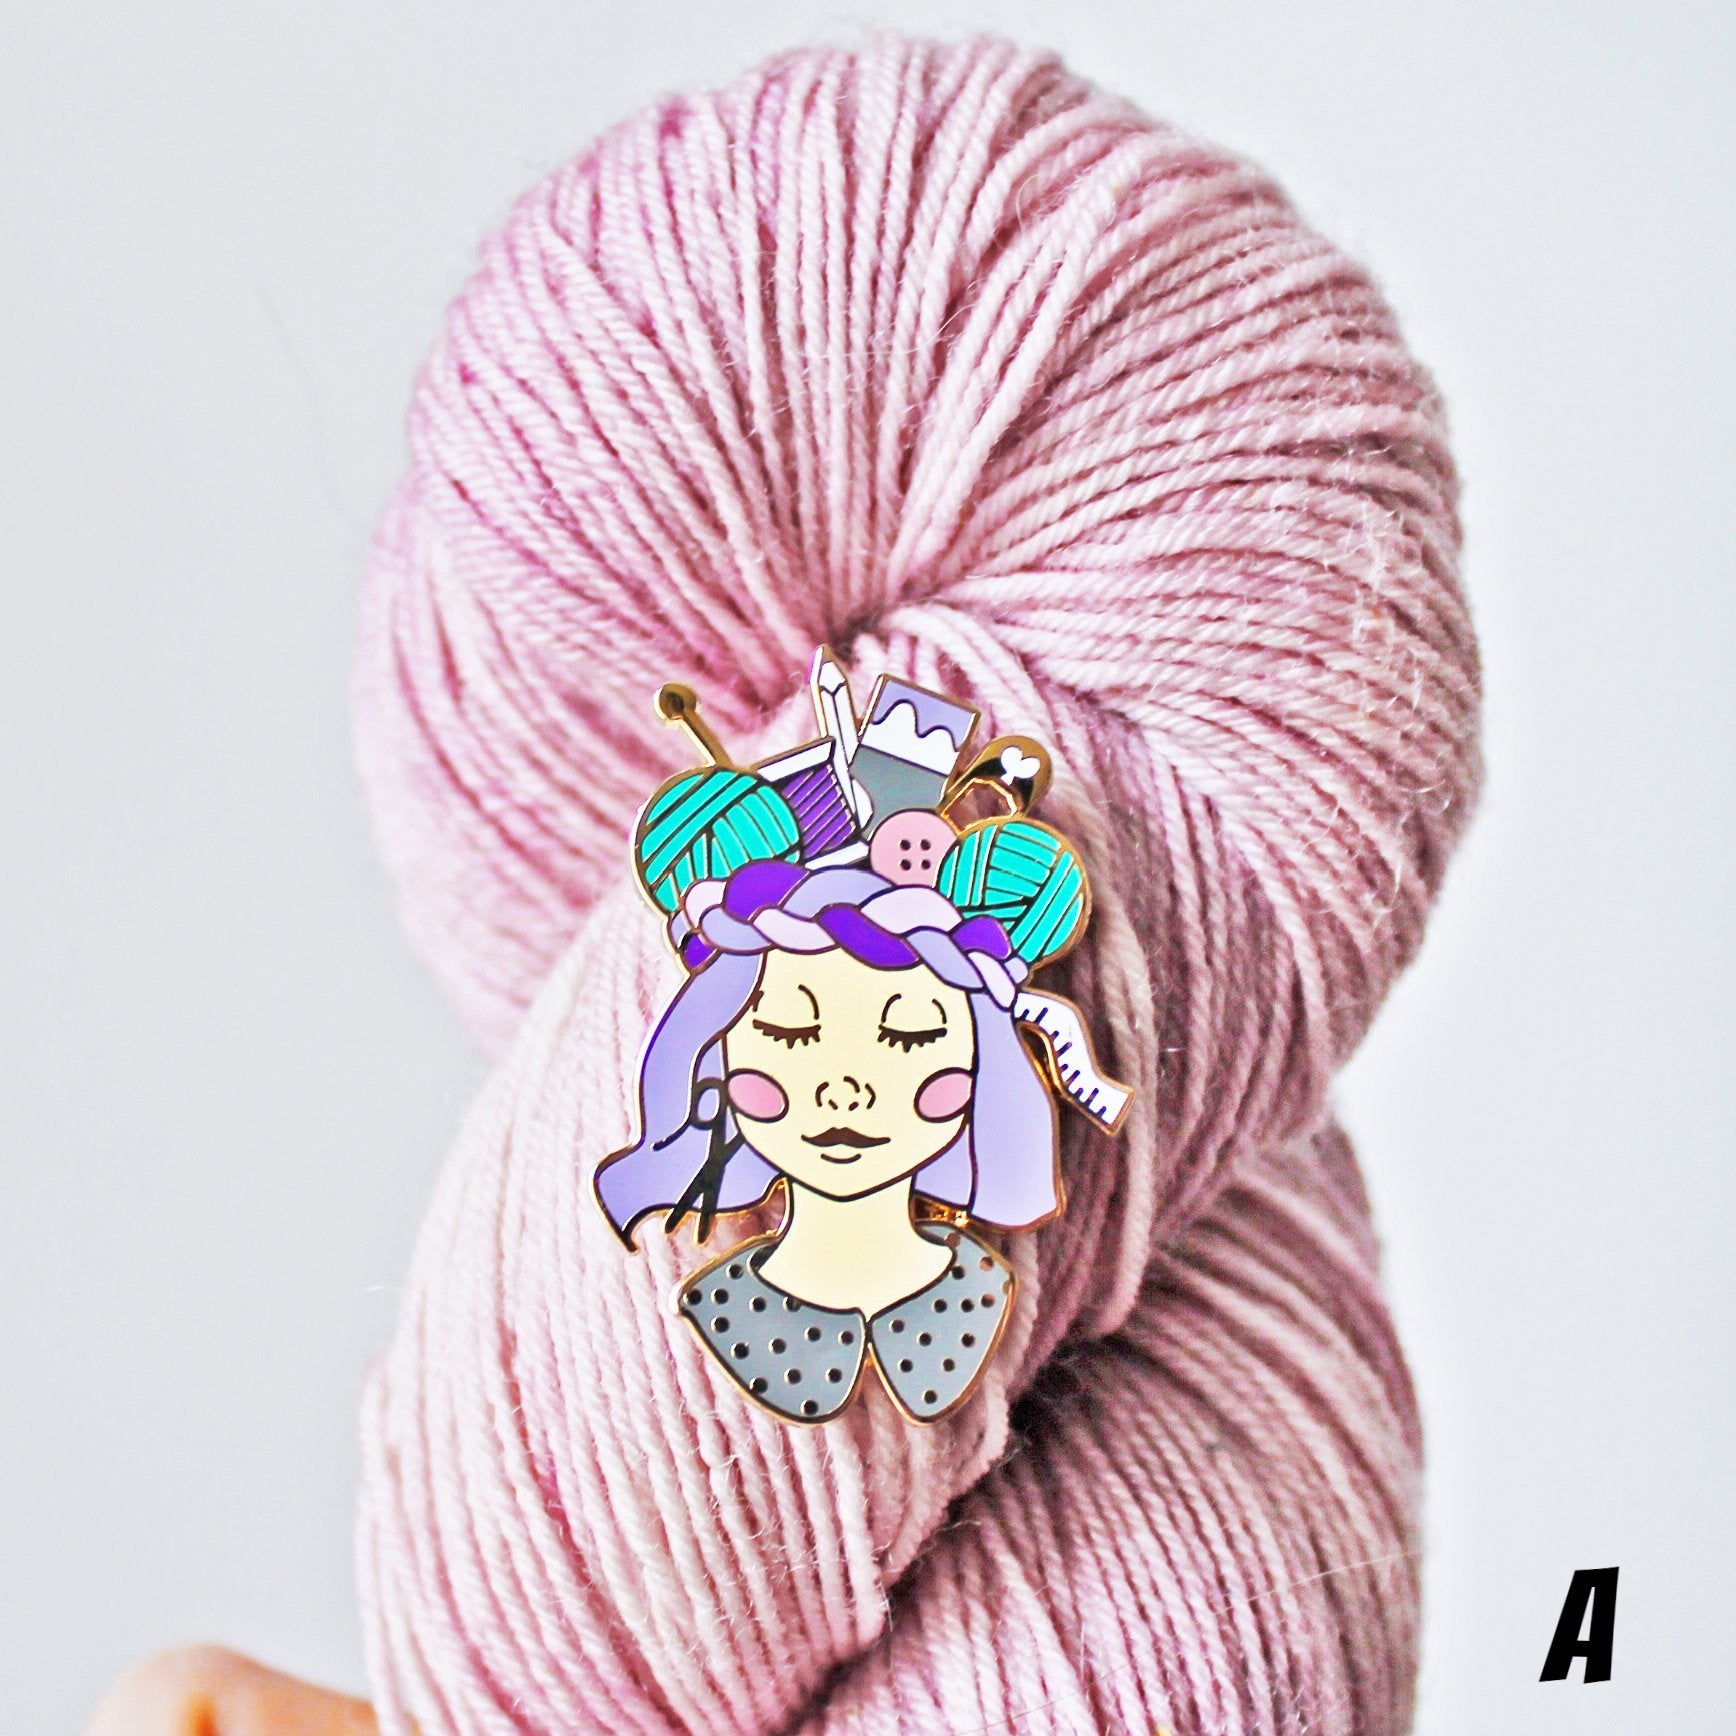 Unique pin for crafters, makers, knitters and crocheters. This creative enamel pin features a girl with a crown of craft supplies, available in multiple skin tones.